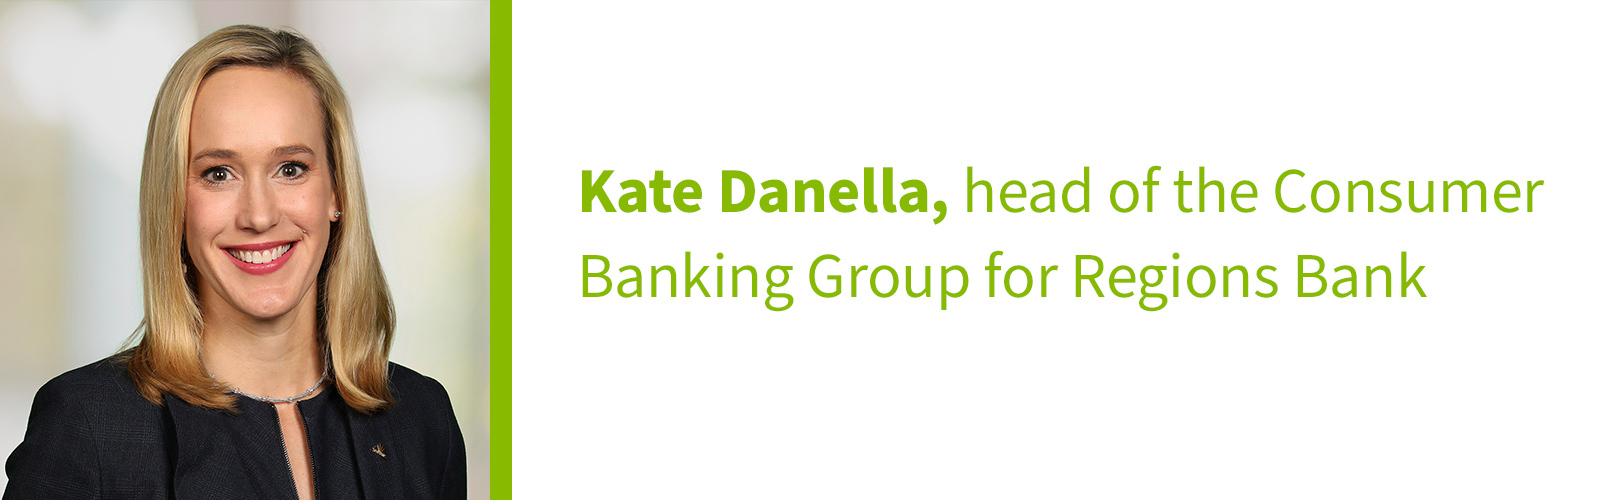 Kate Danella, head of the Consumer Banking Group for Regions Bank